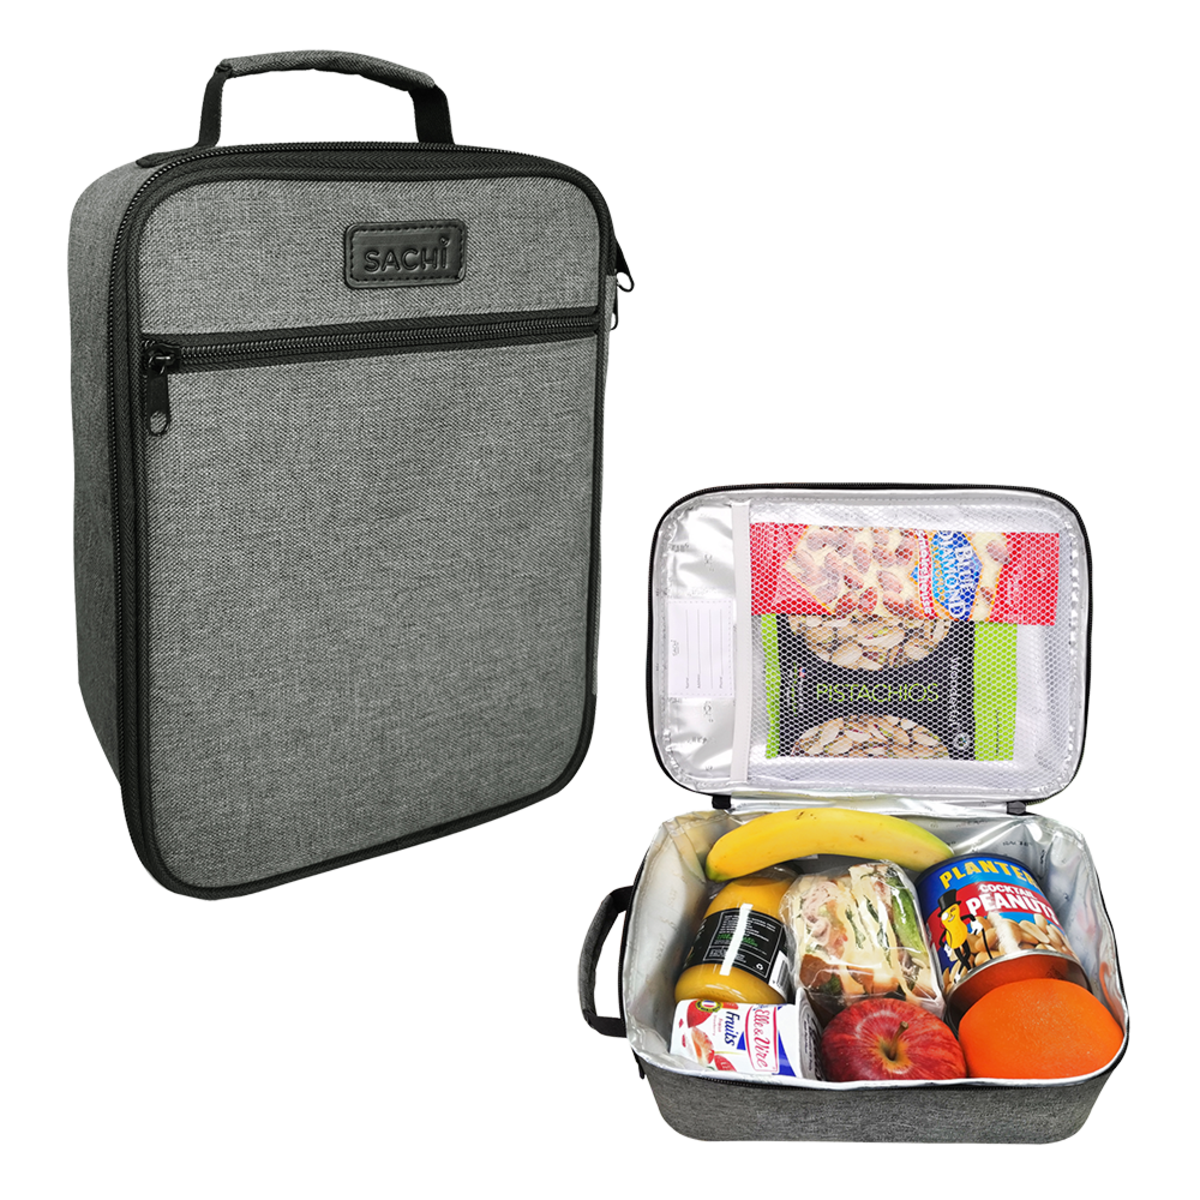 Sachi Insulated Lunch Bag - Charcoal